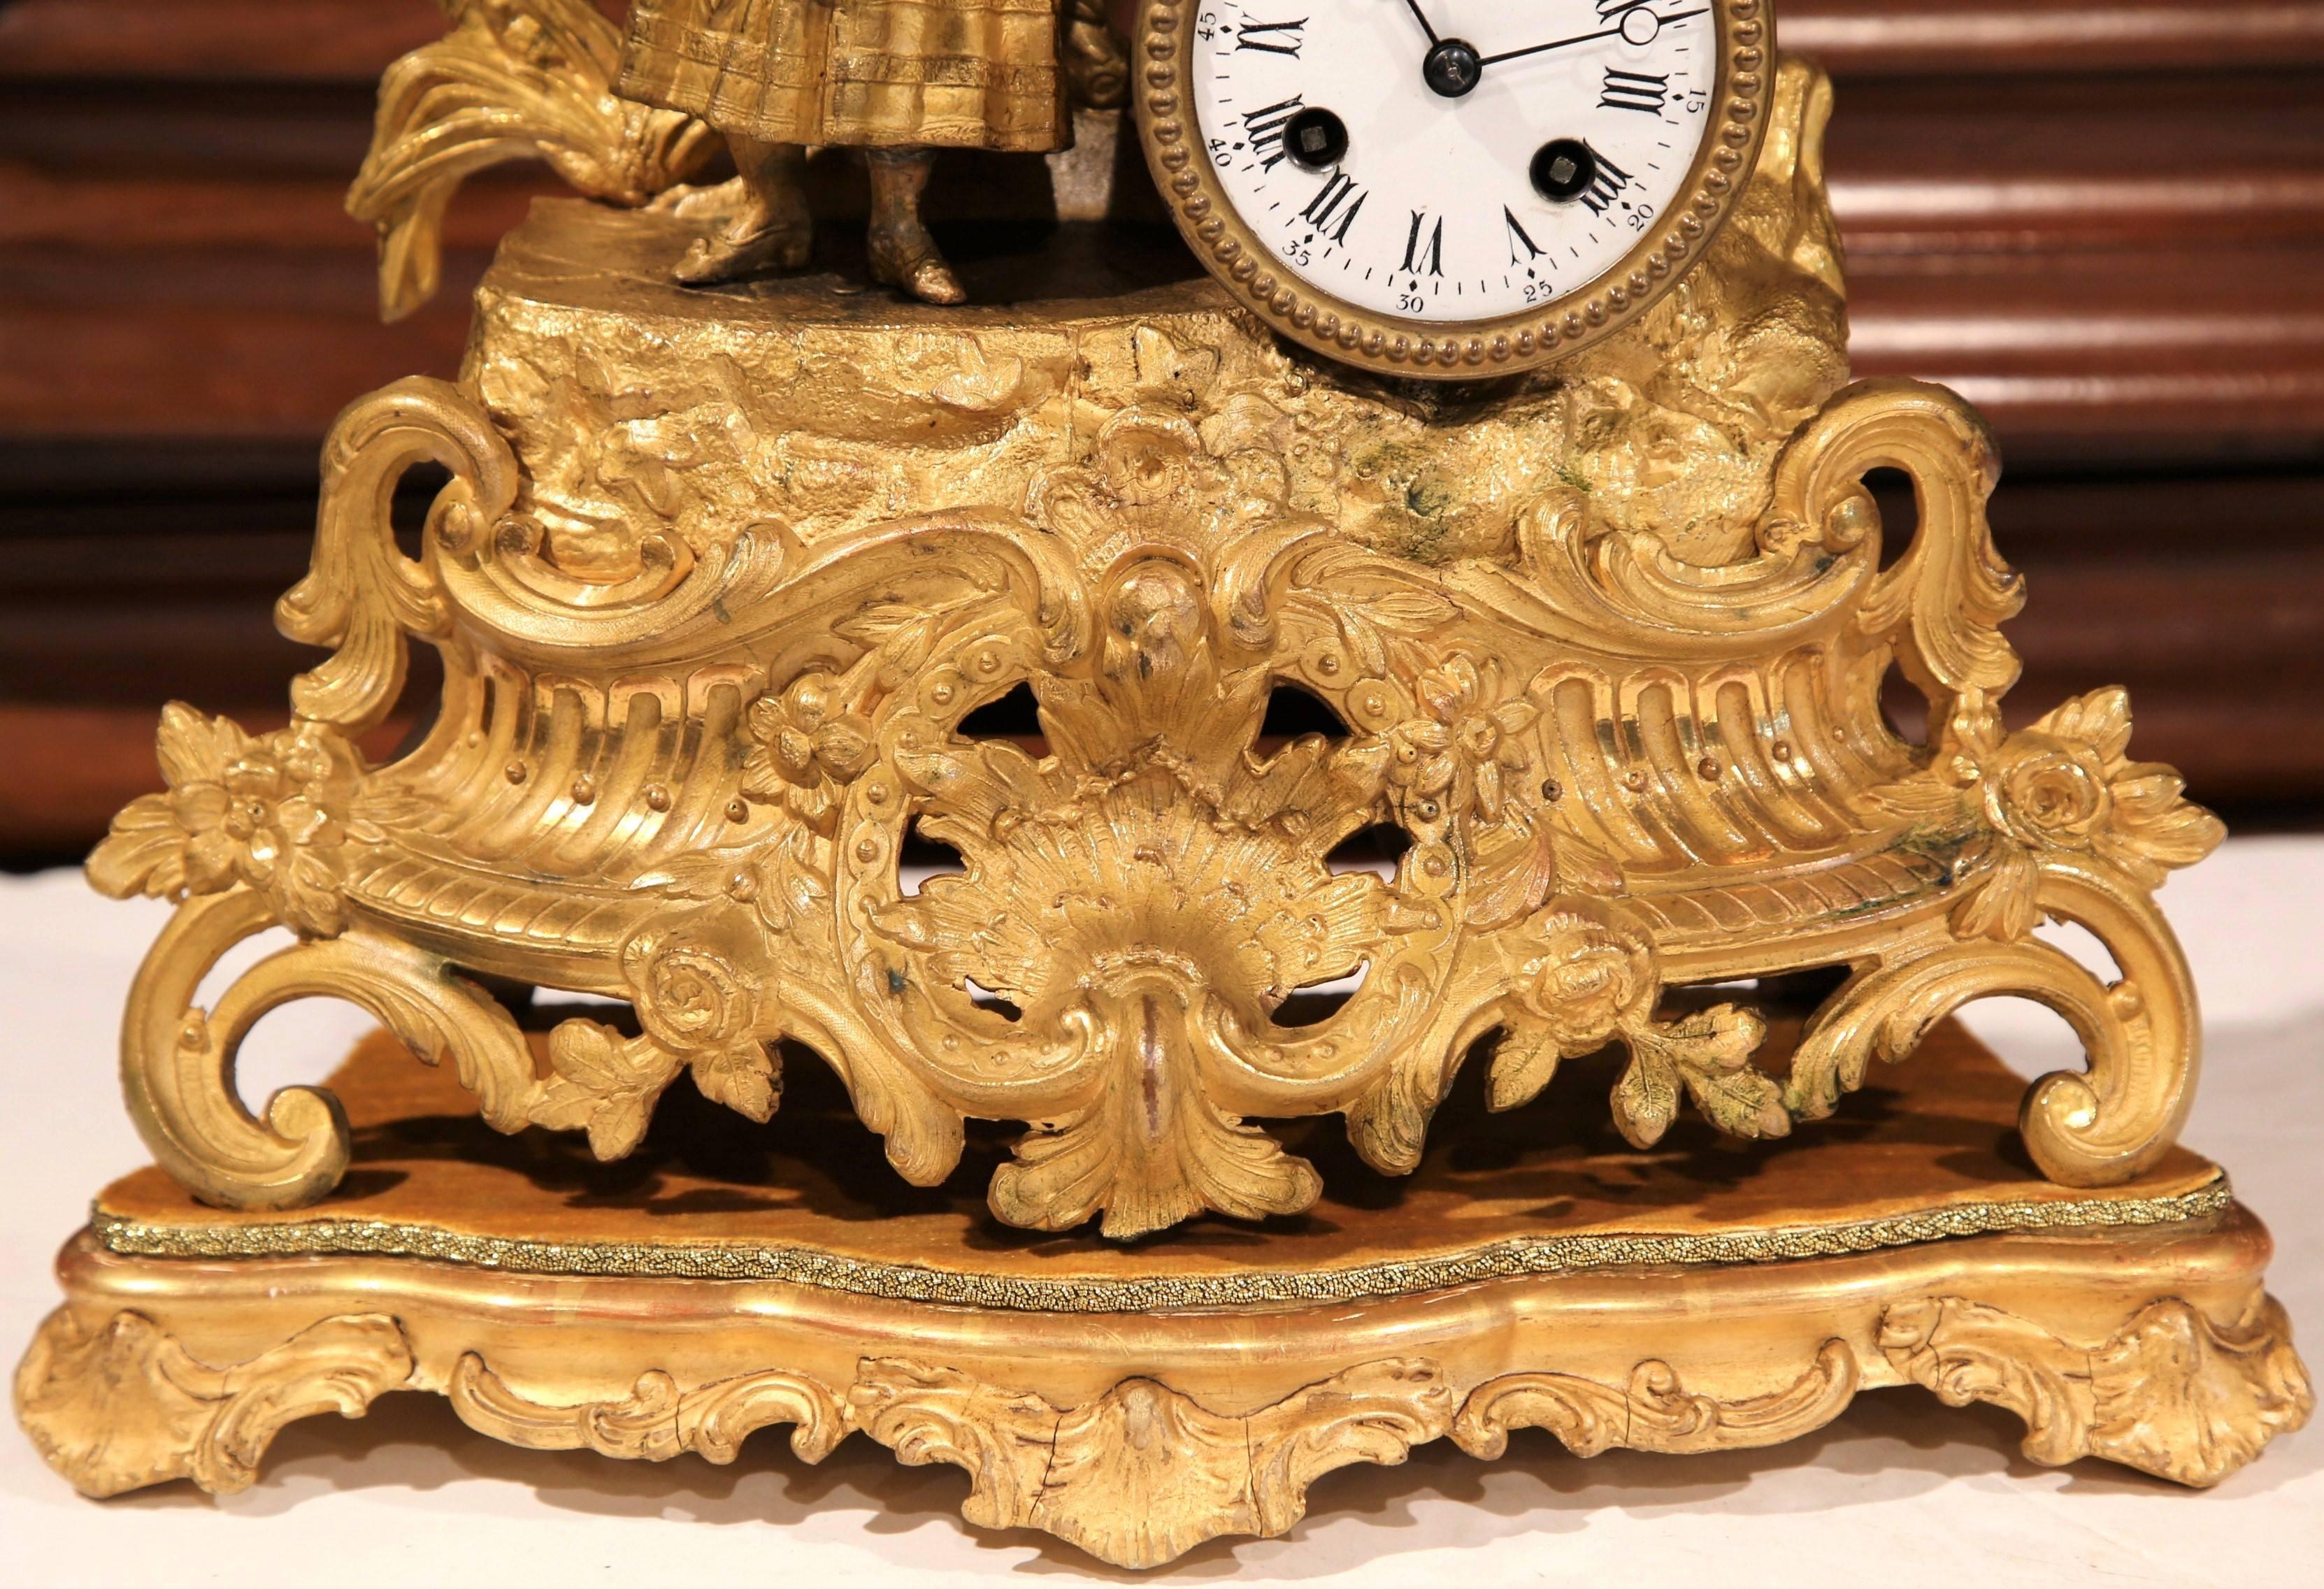 Add extra elegance to your mantle or desk with this gold plated mantel clock. Created in France, circa 1860, the working, asymmetrical clock features a peasant woman carrying a basket of fruits and a jug of water on her shoulders. There is Intricate